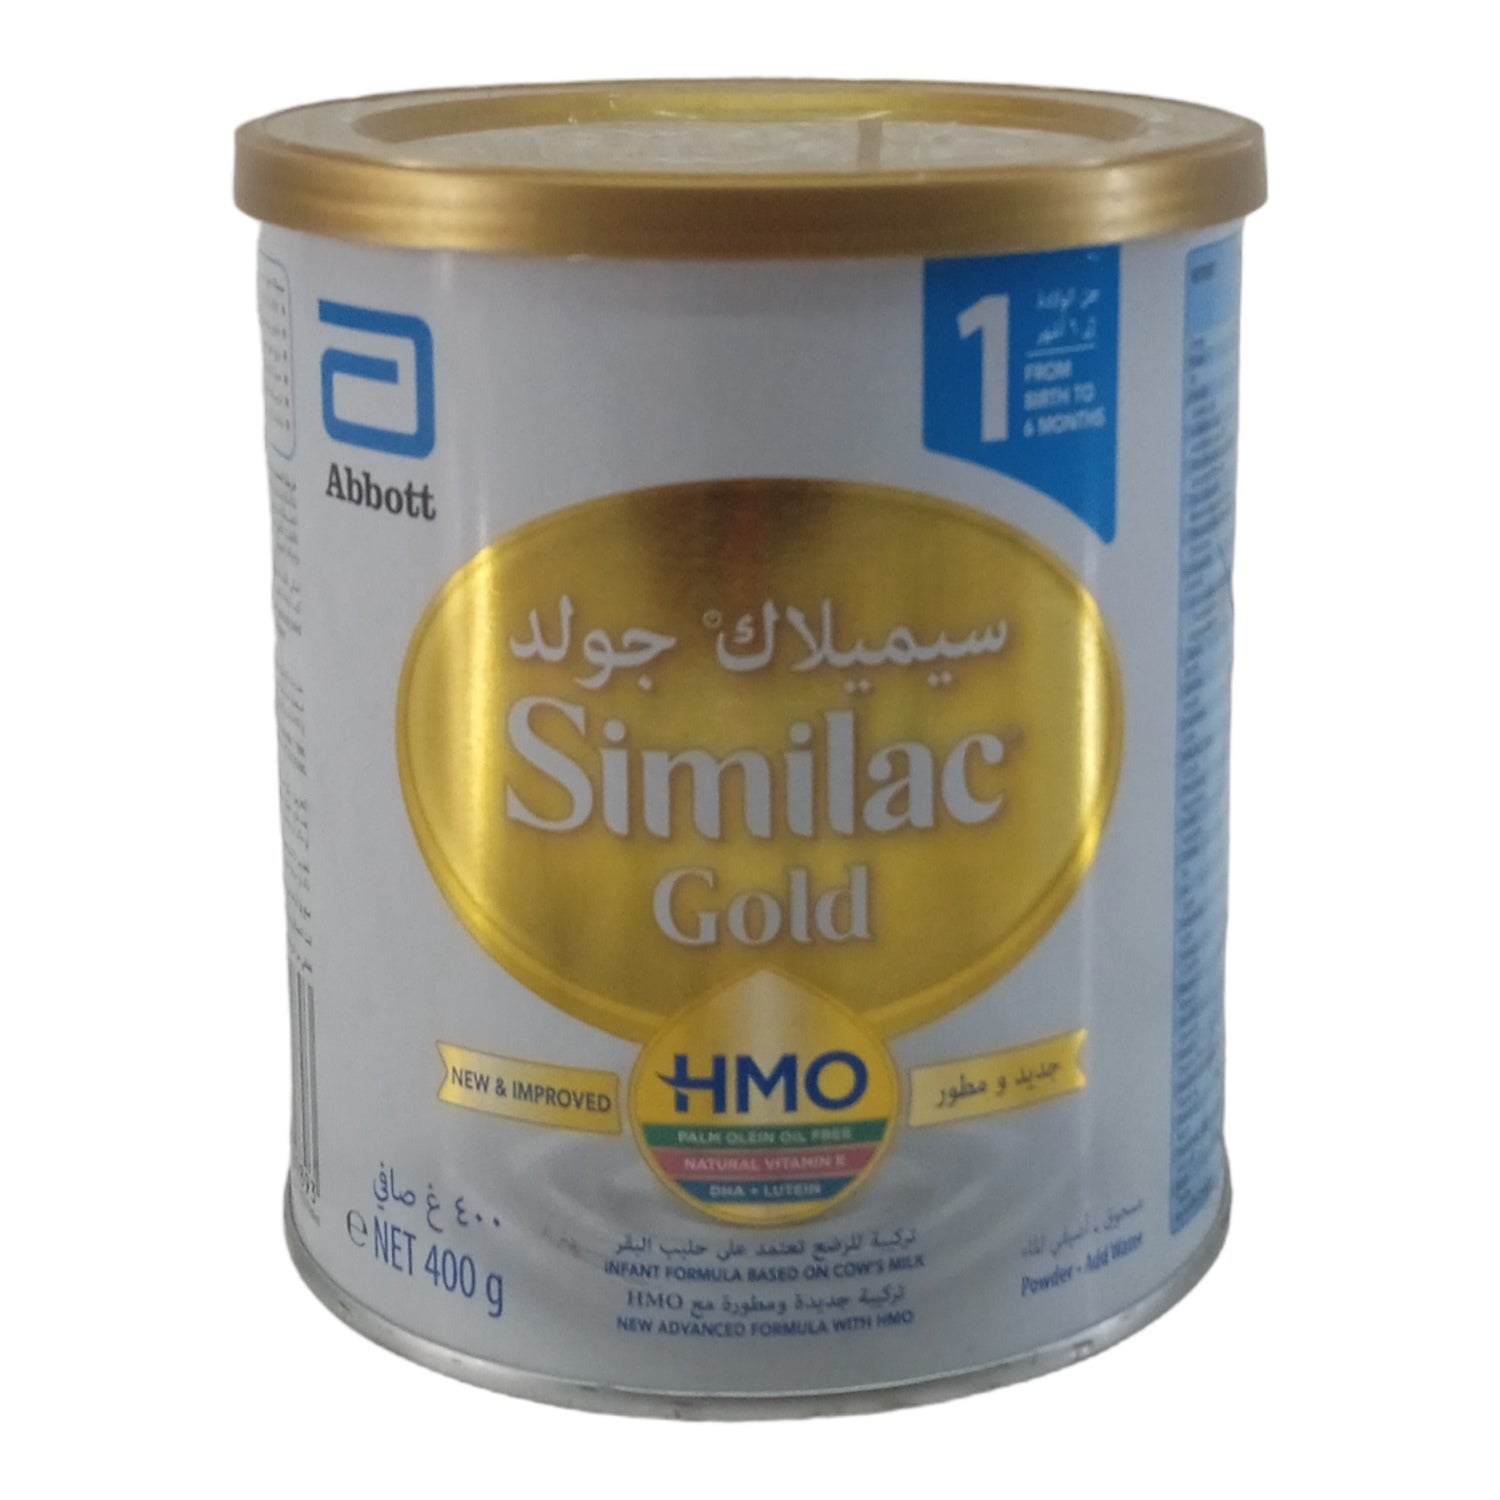 which similac infant formula is best for 6 month baby?